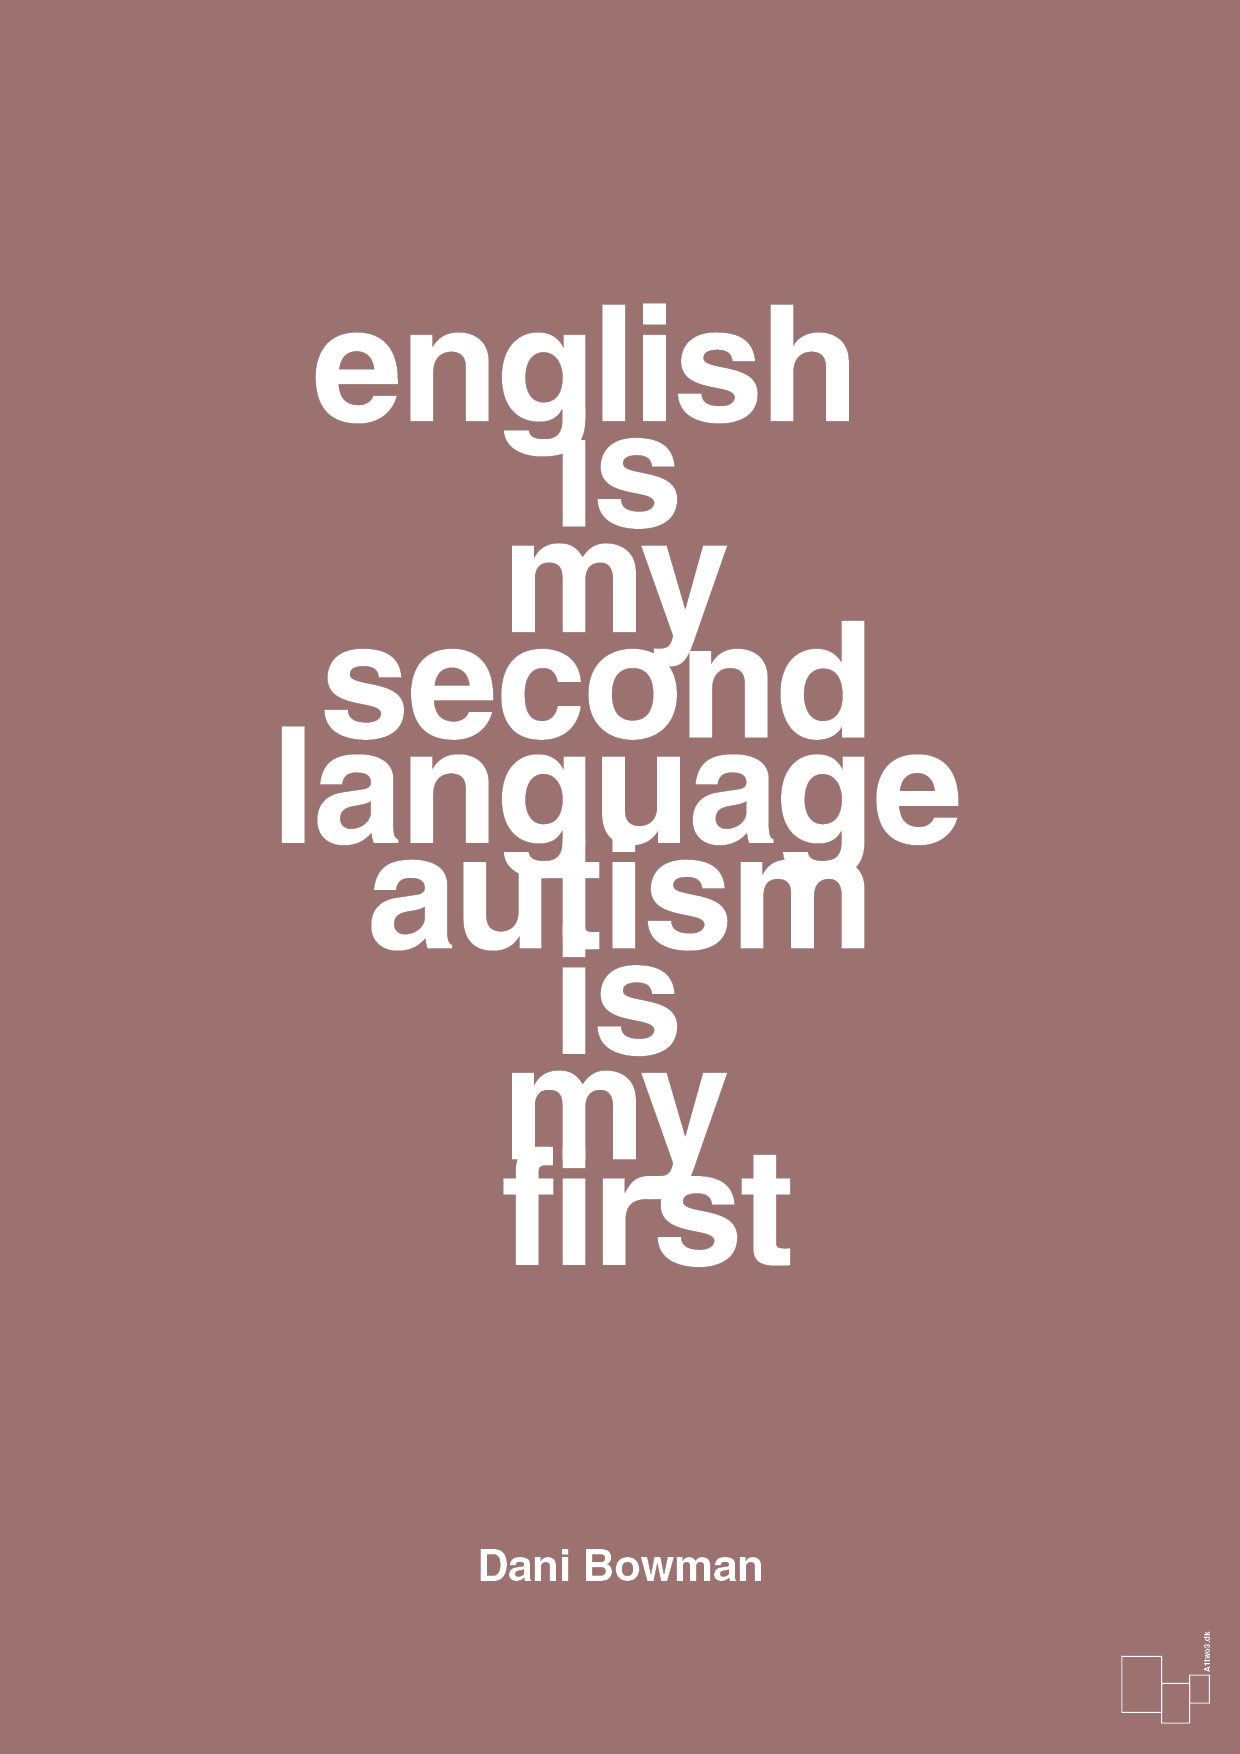 english is my second language autism is my first - Plakat med Samfund i Plum